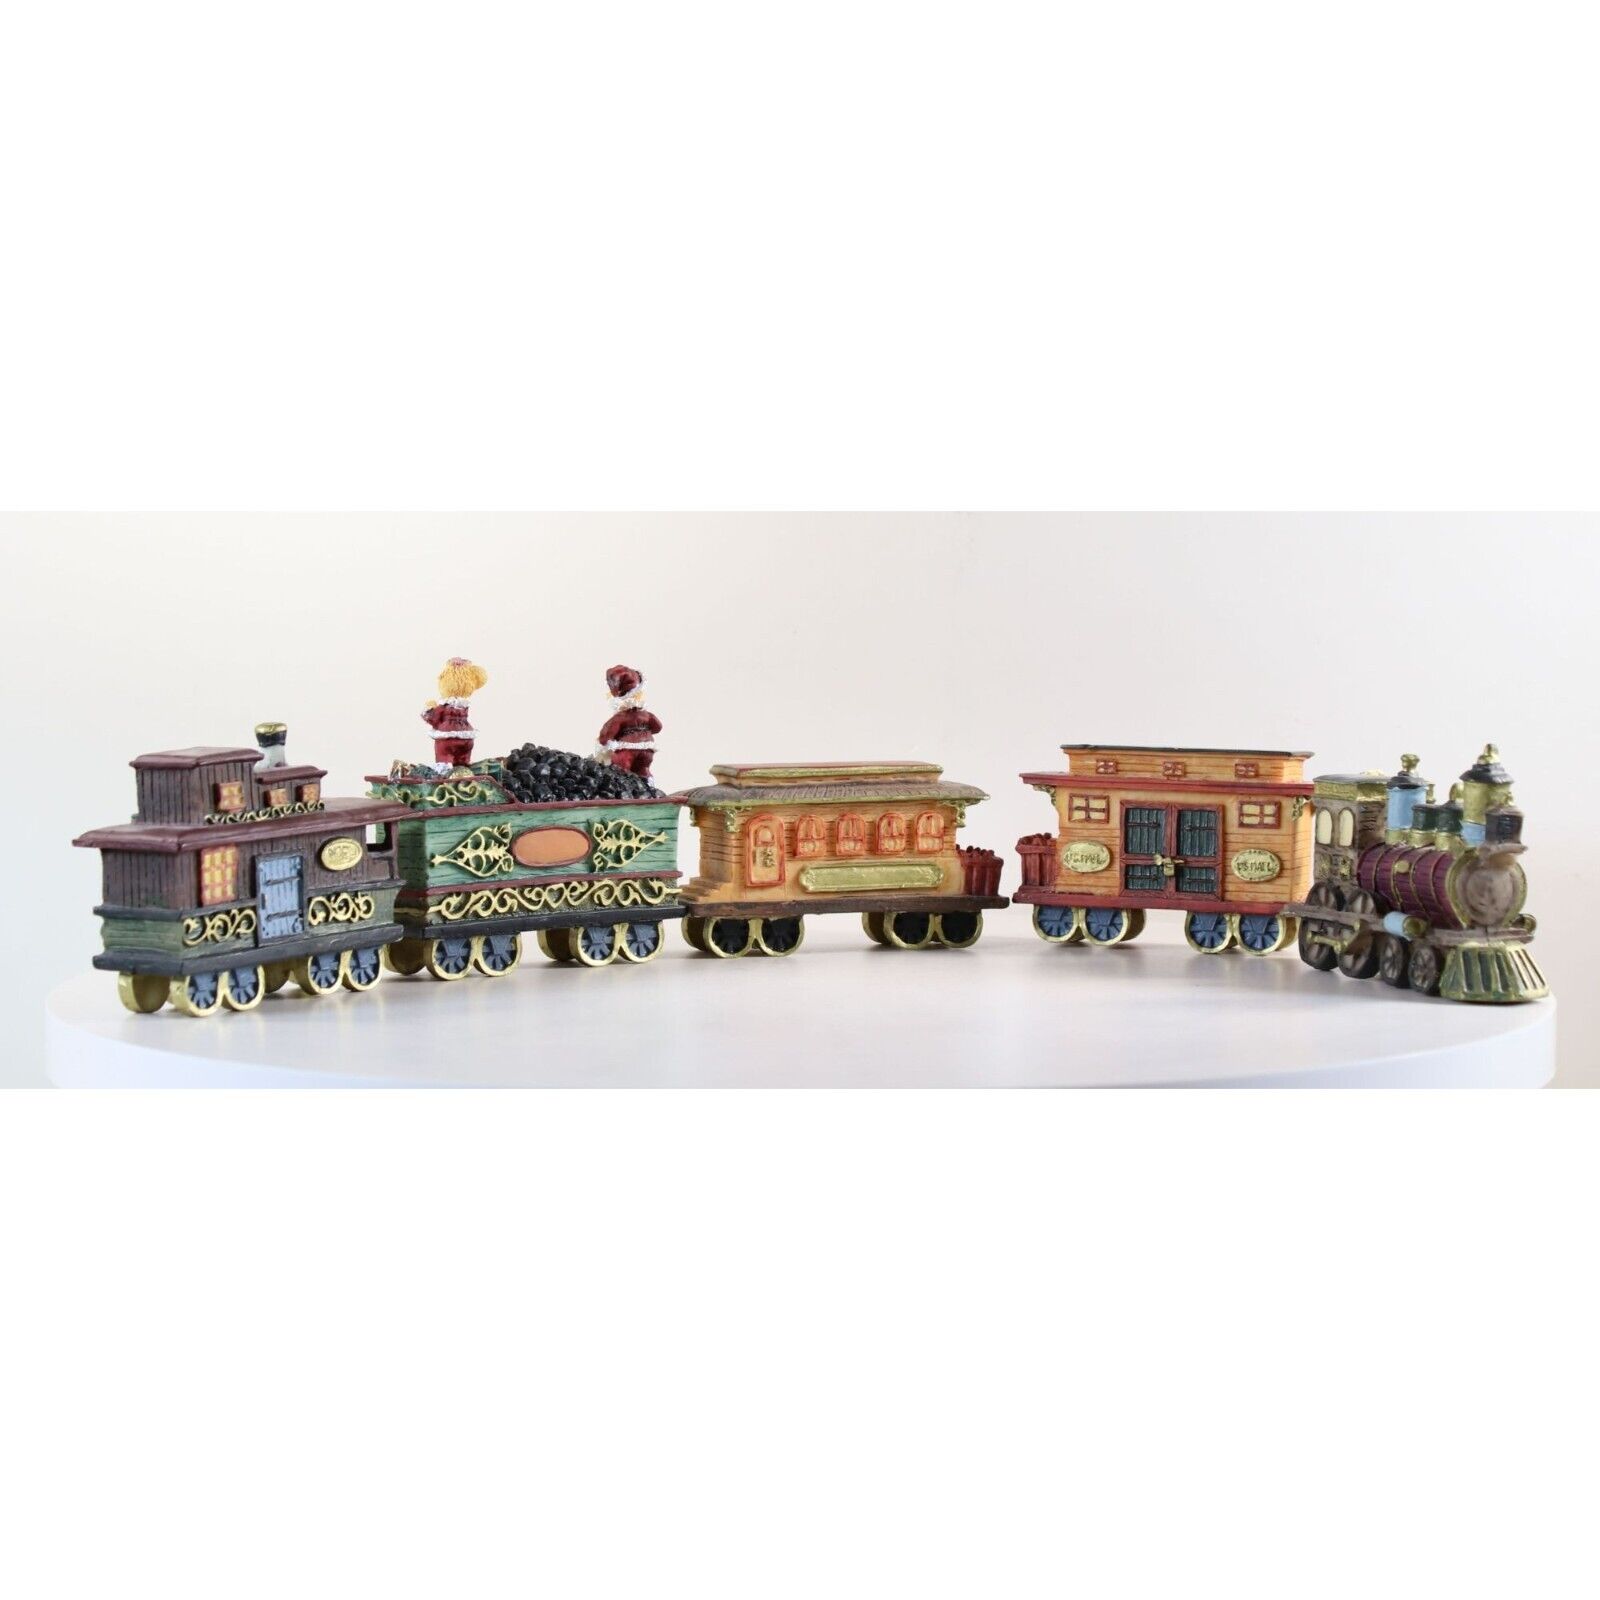 Vintage, Holiday Collection, Ceramic Christmas Train, 5 piece Set Teddy Bears